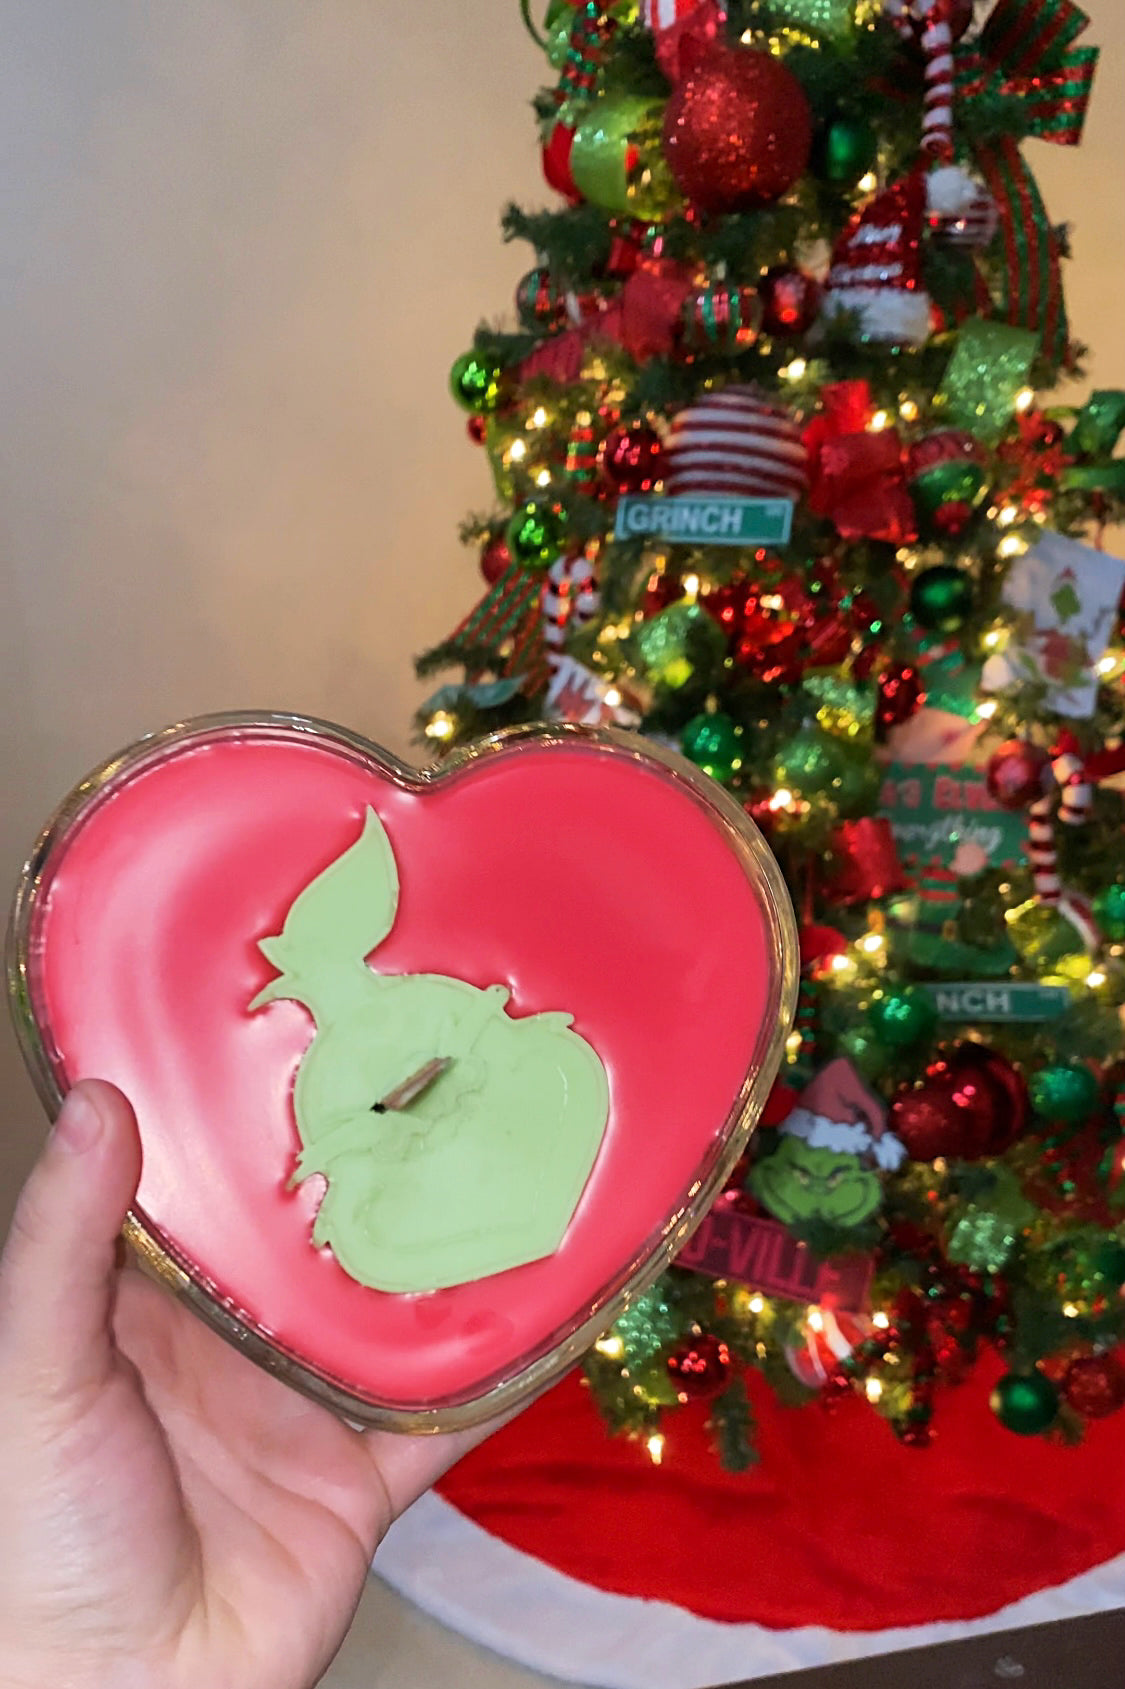 The Grinches Heart Grew 3 Sizes